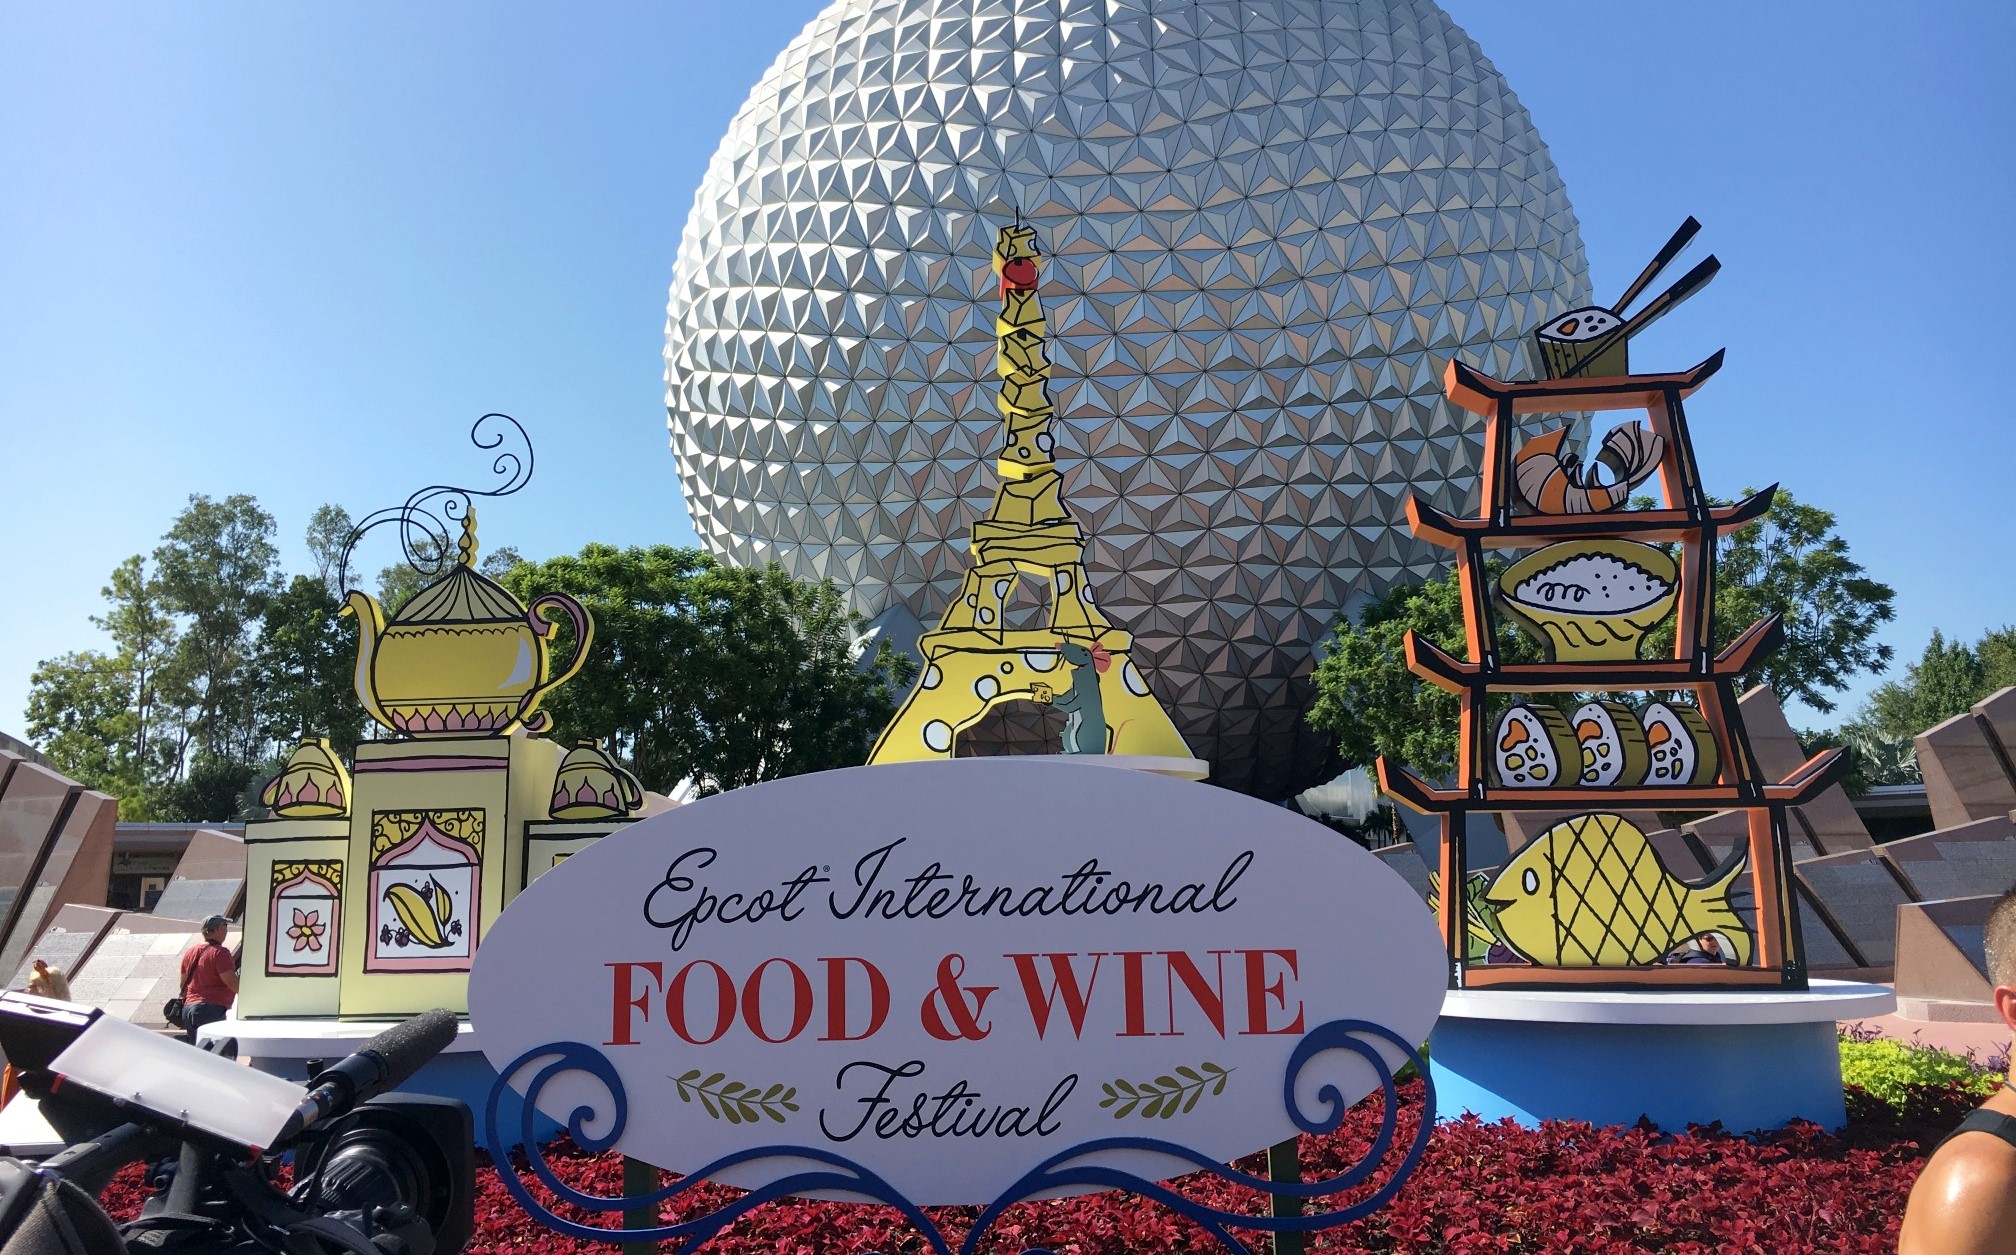 VIDEO: Top Food Not to Miss at Epcot Food & Wine Festival 2017